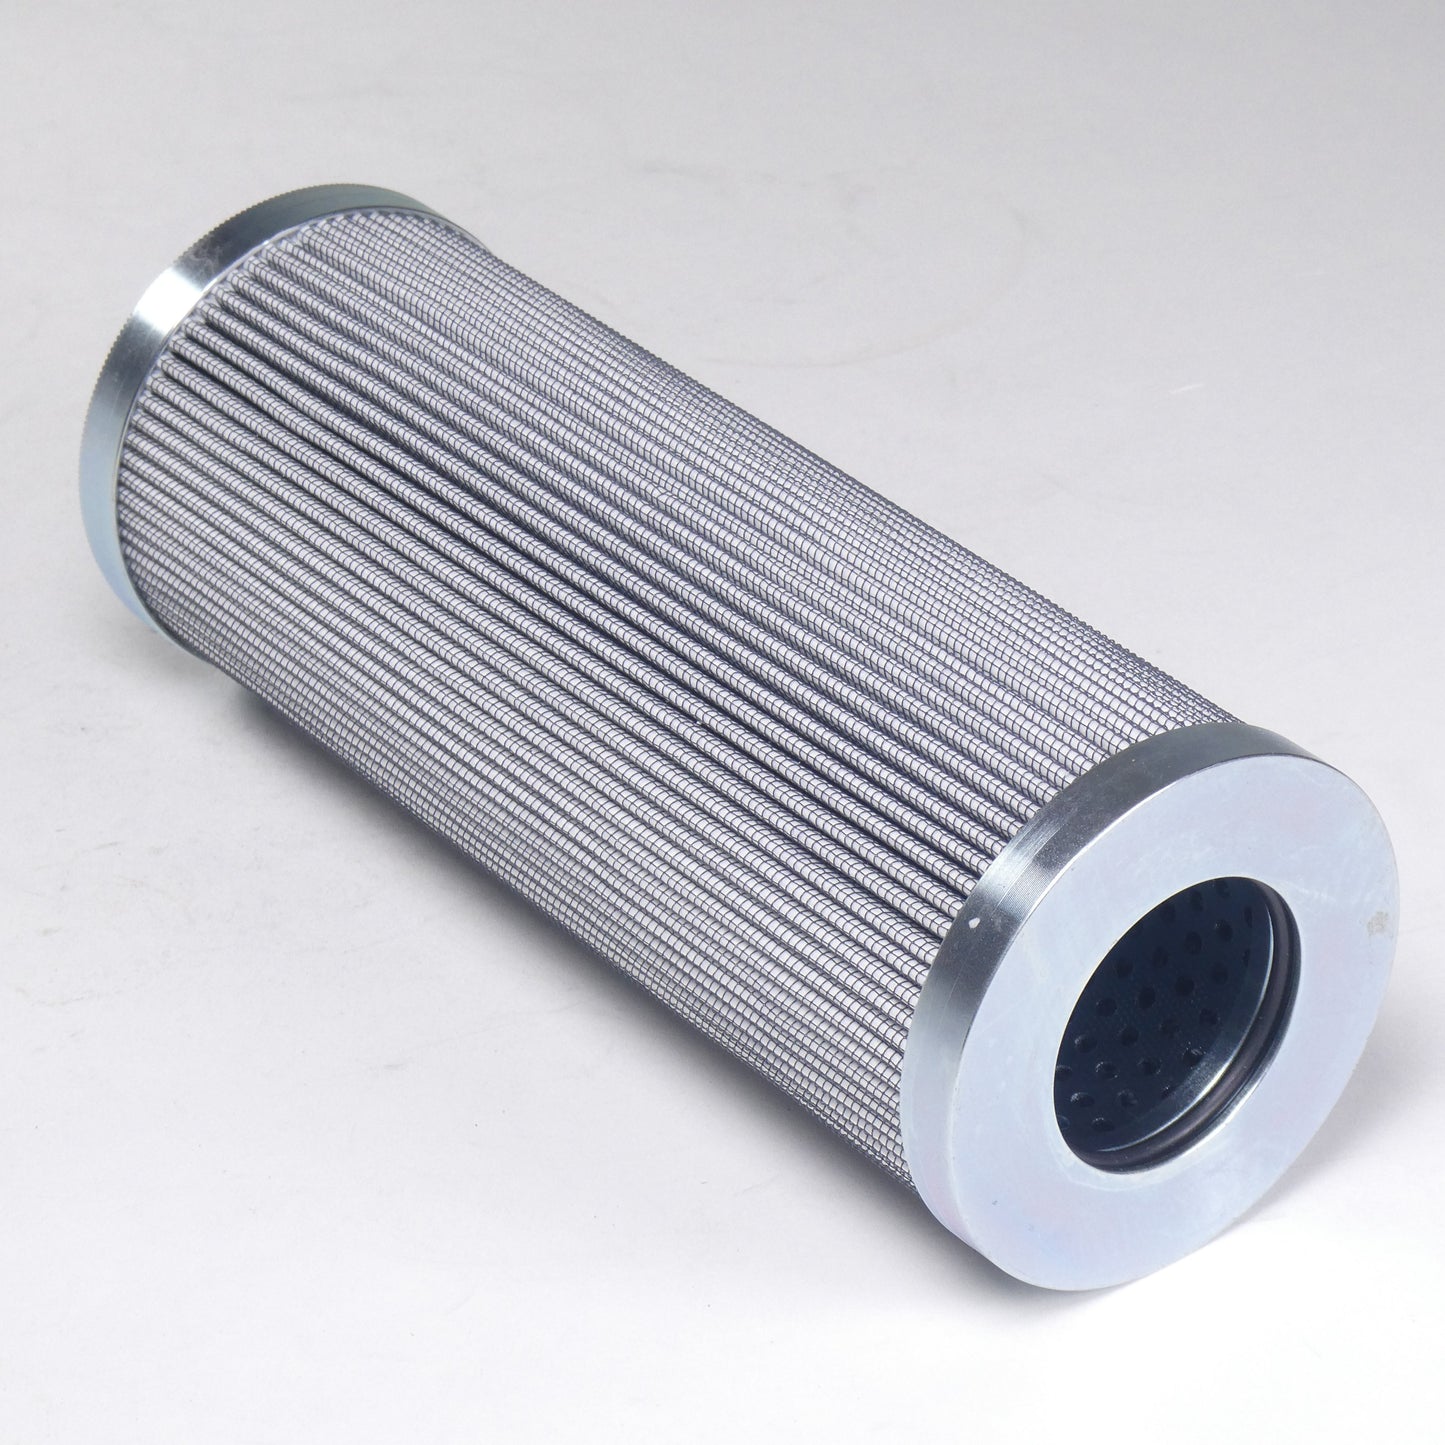 Hydrafil Replacement Filter Element for Norco HF3HC13B